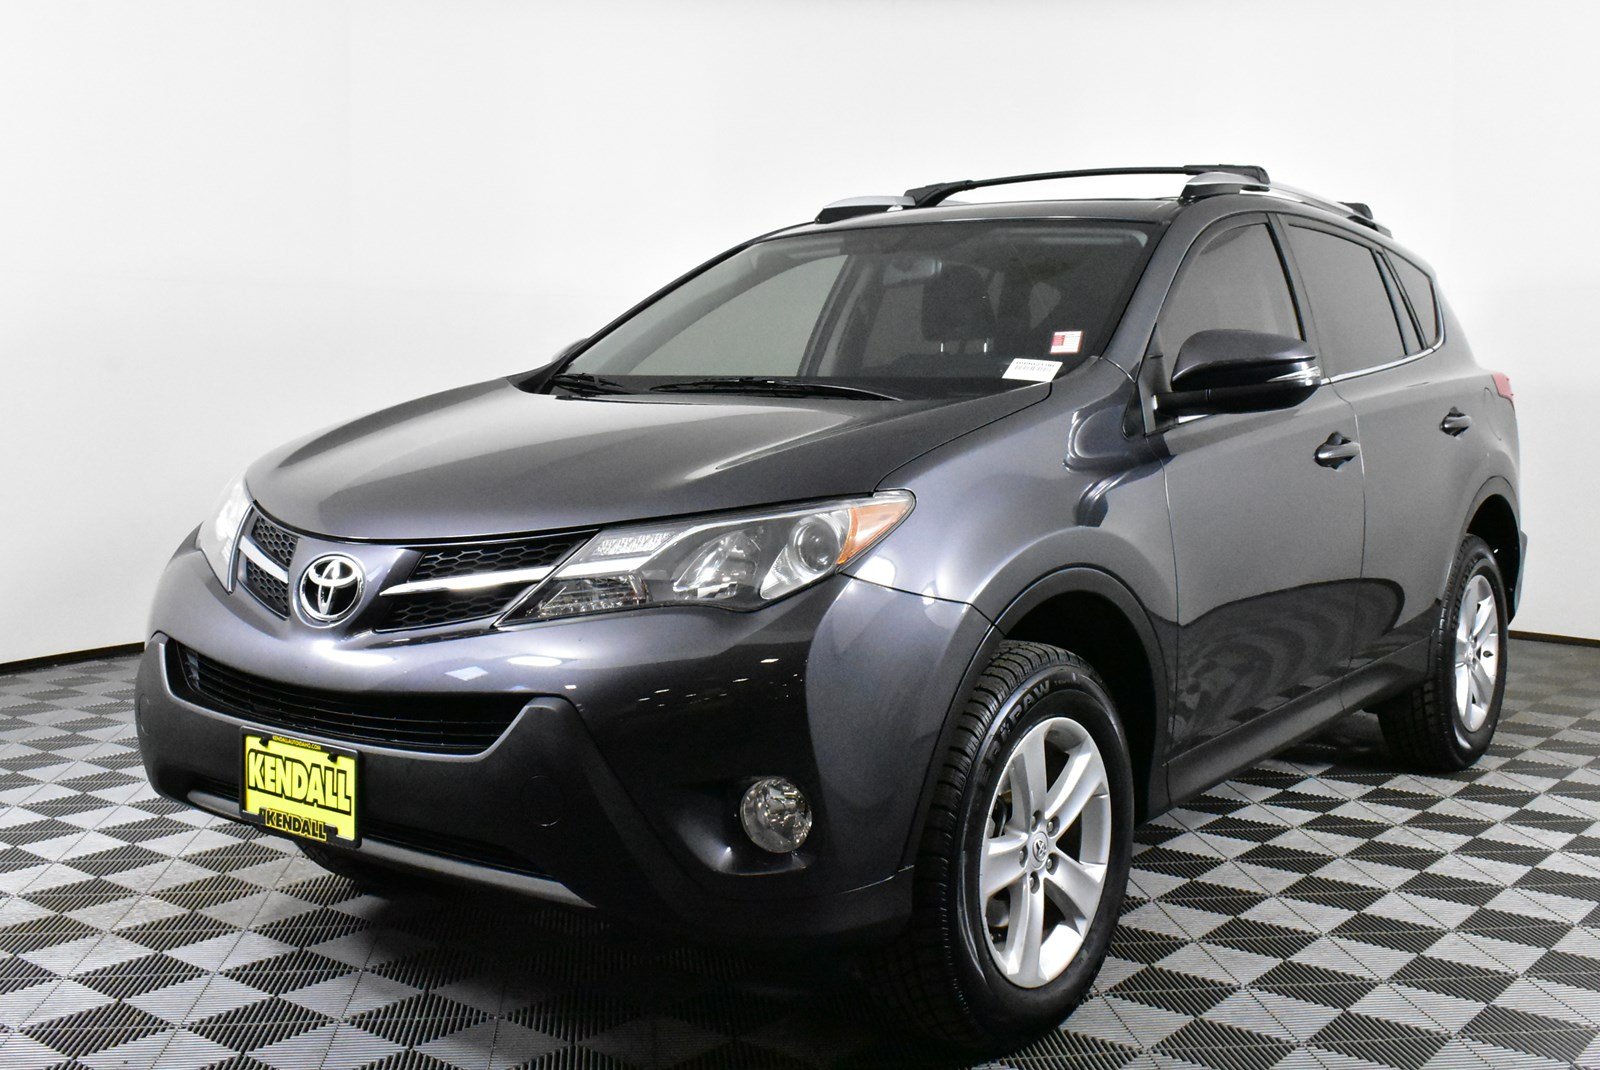 PreOwned 2014 Toyota RAV4 XLE in Nampa D990219B